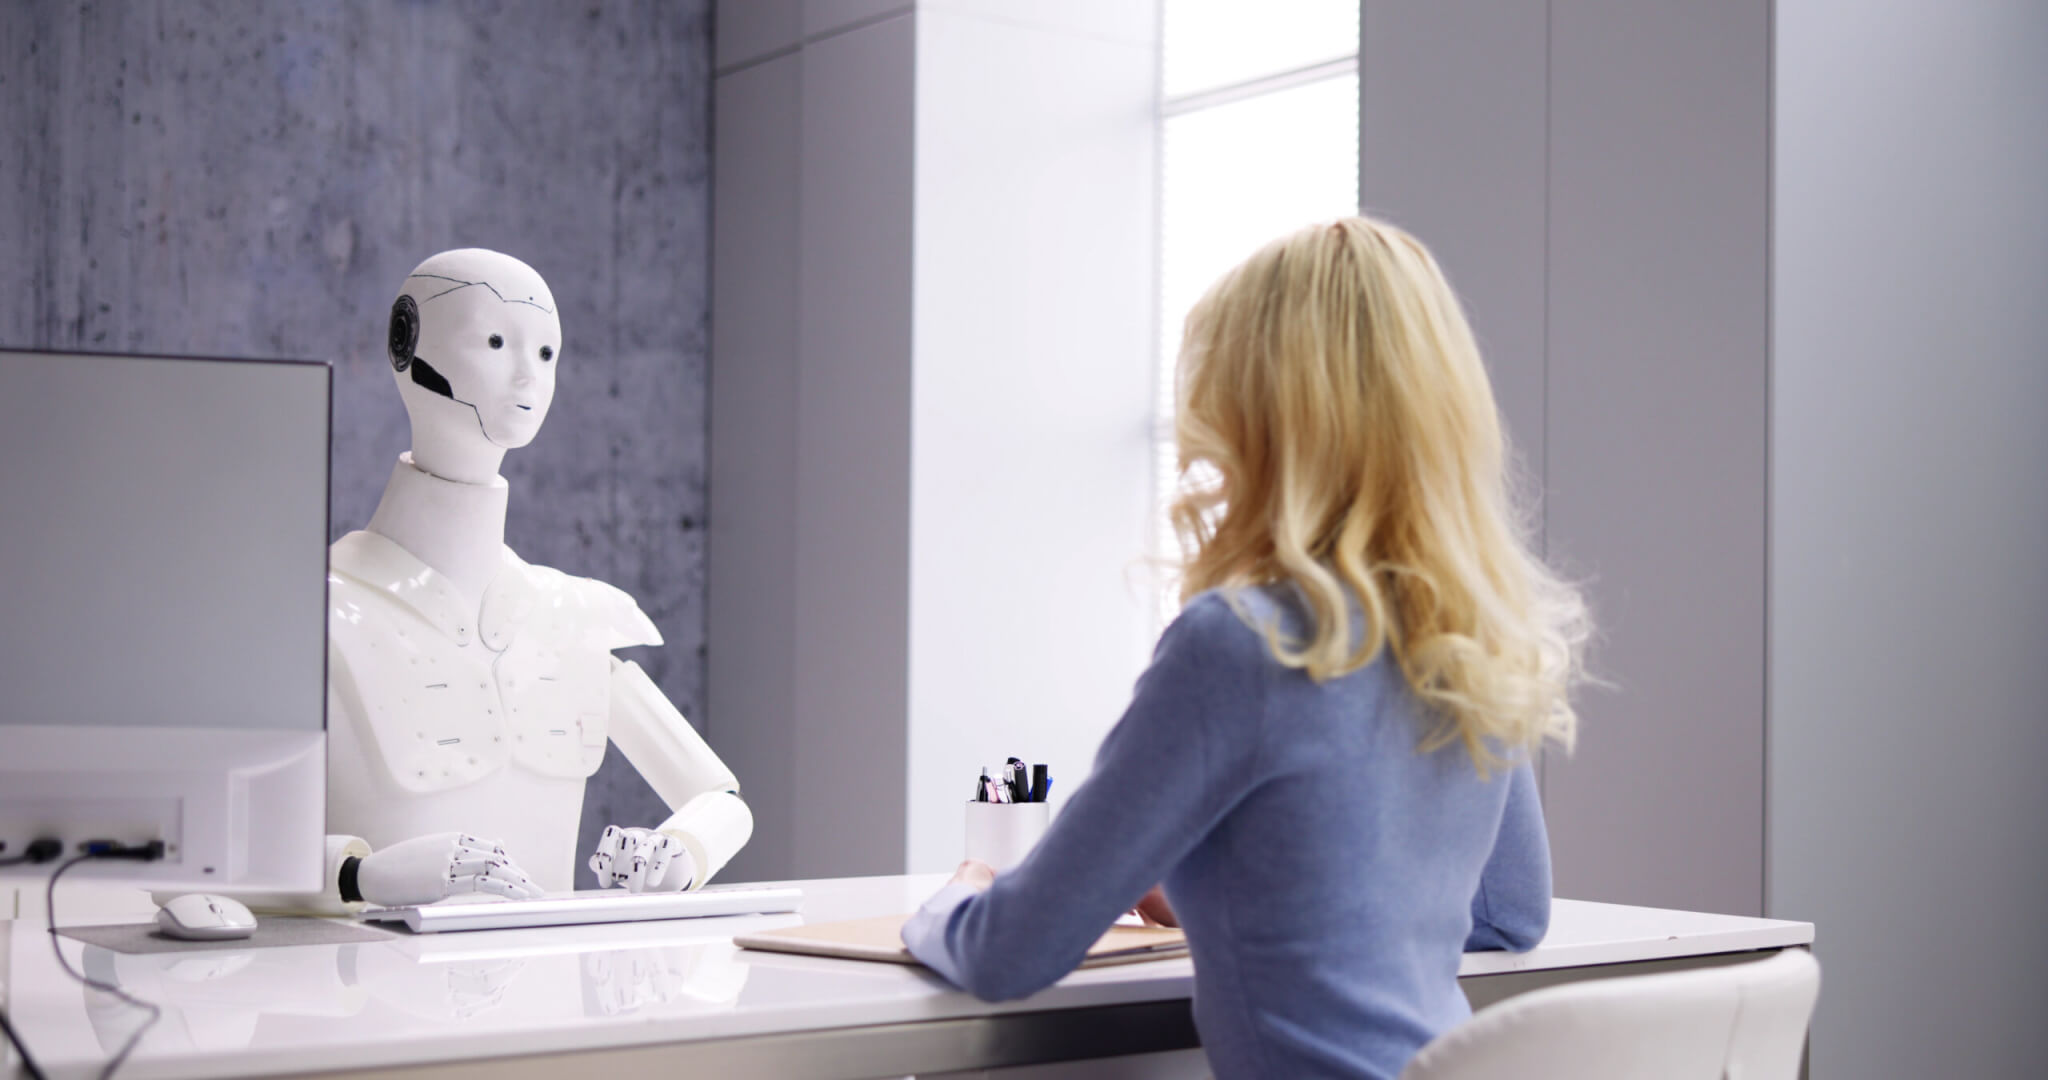 Woman at Interview With AI Robot Machine